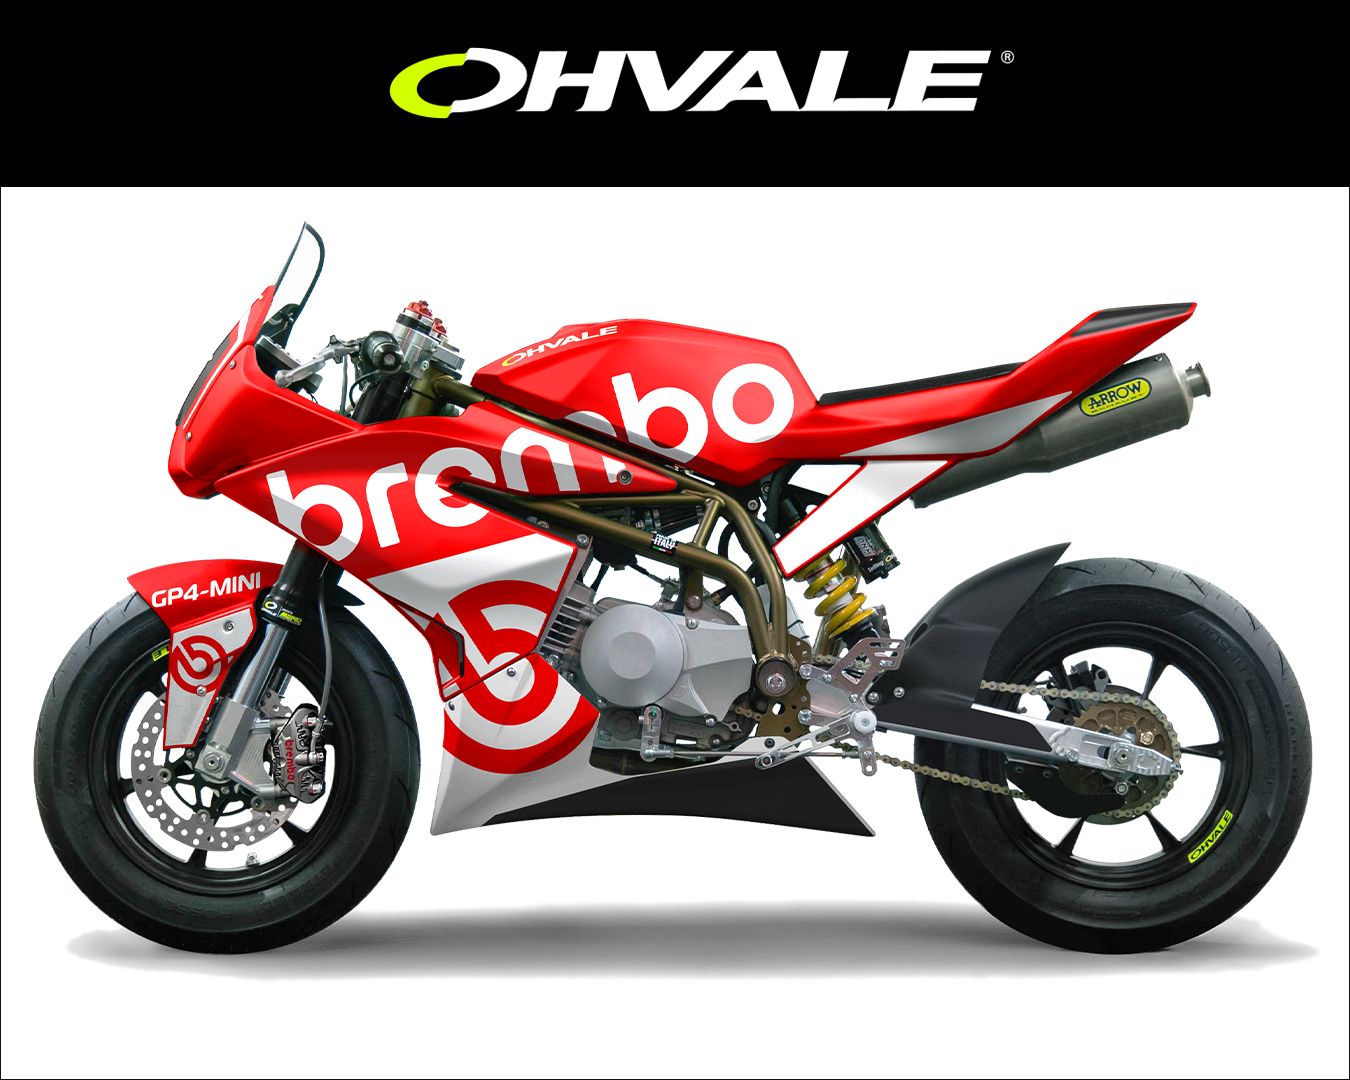 The new Brembo's front brake system on the Ohvale 190cc - Ohvale